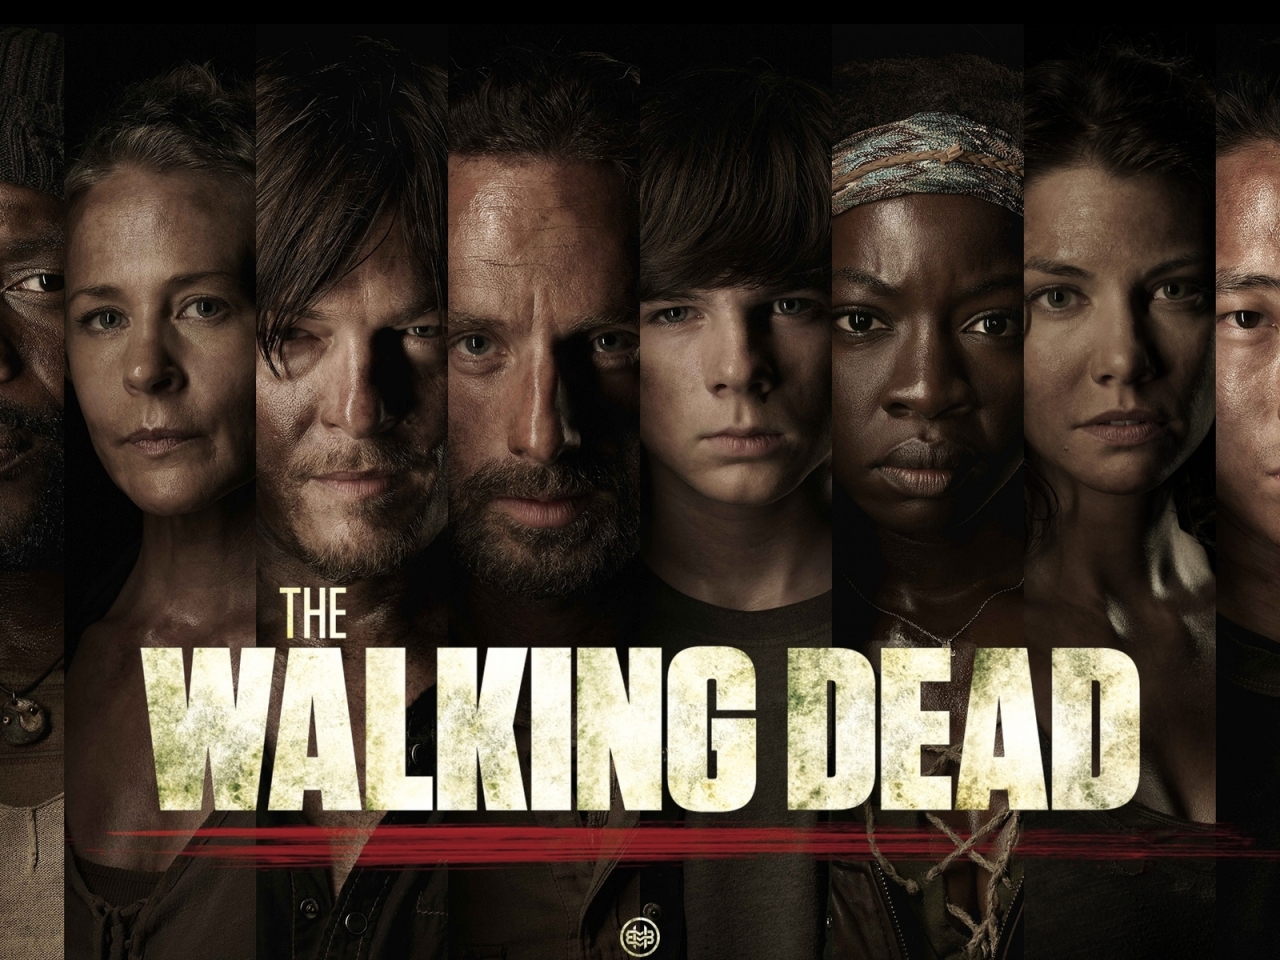 The Walking Dead Characters Poster for 1280 x 960 resolution